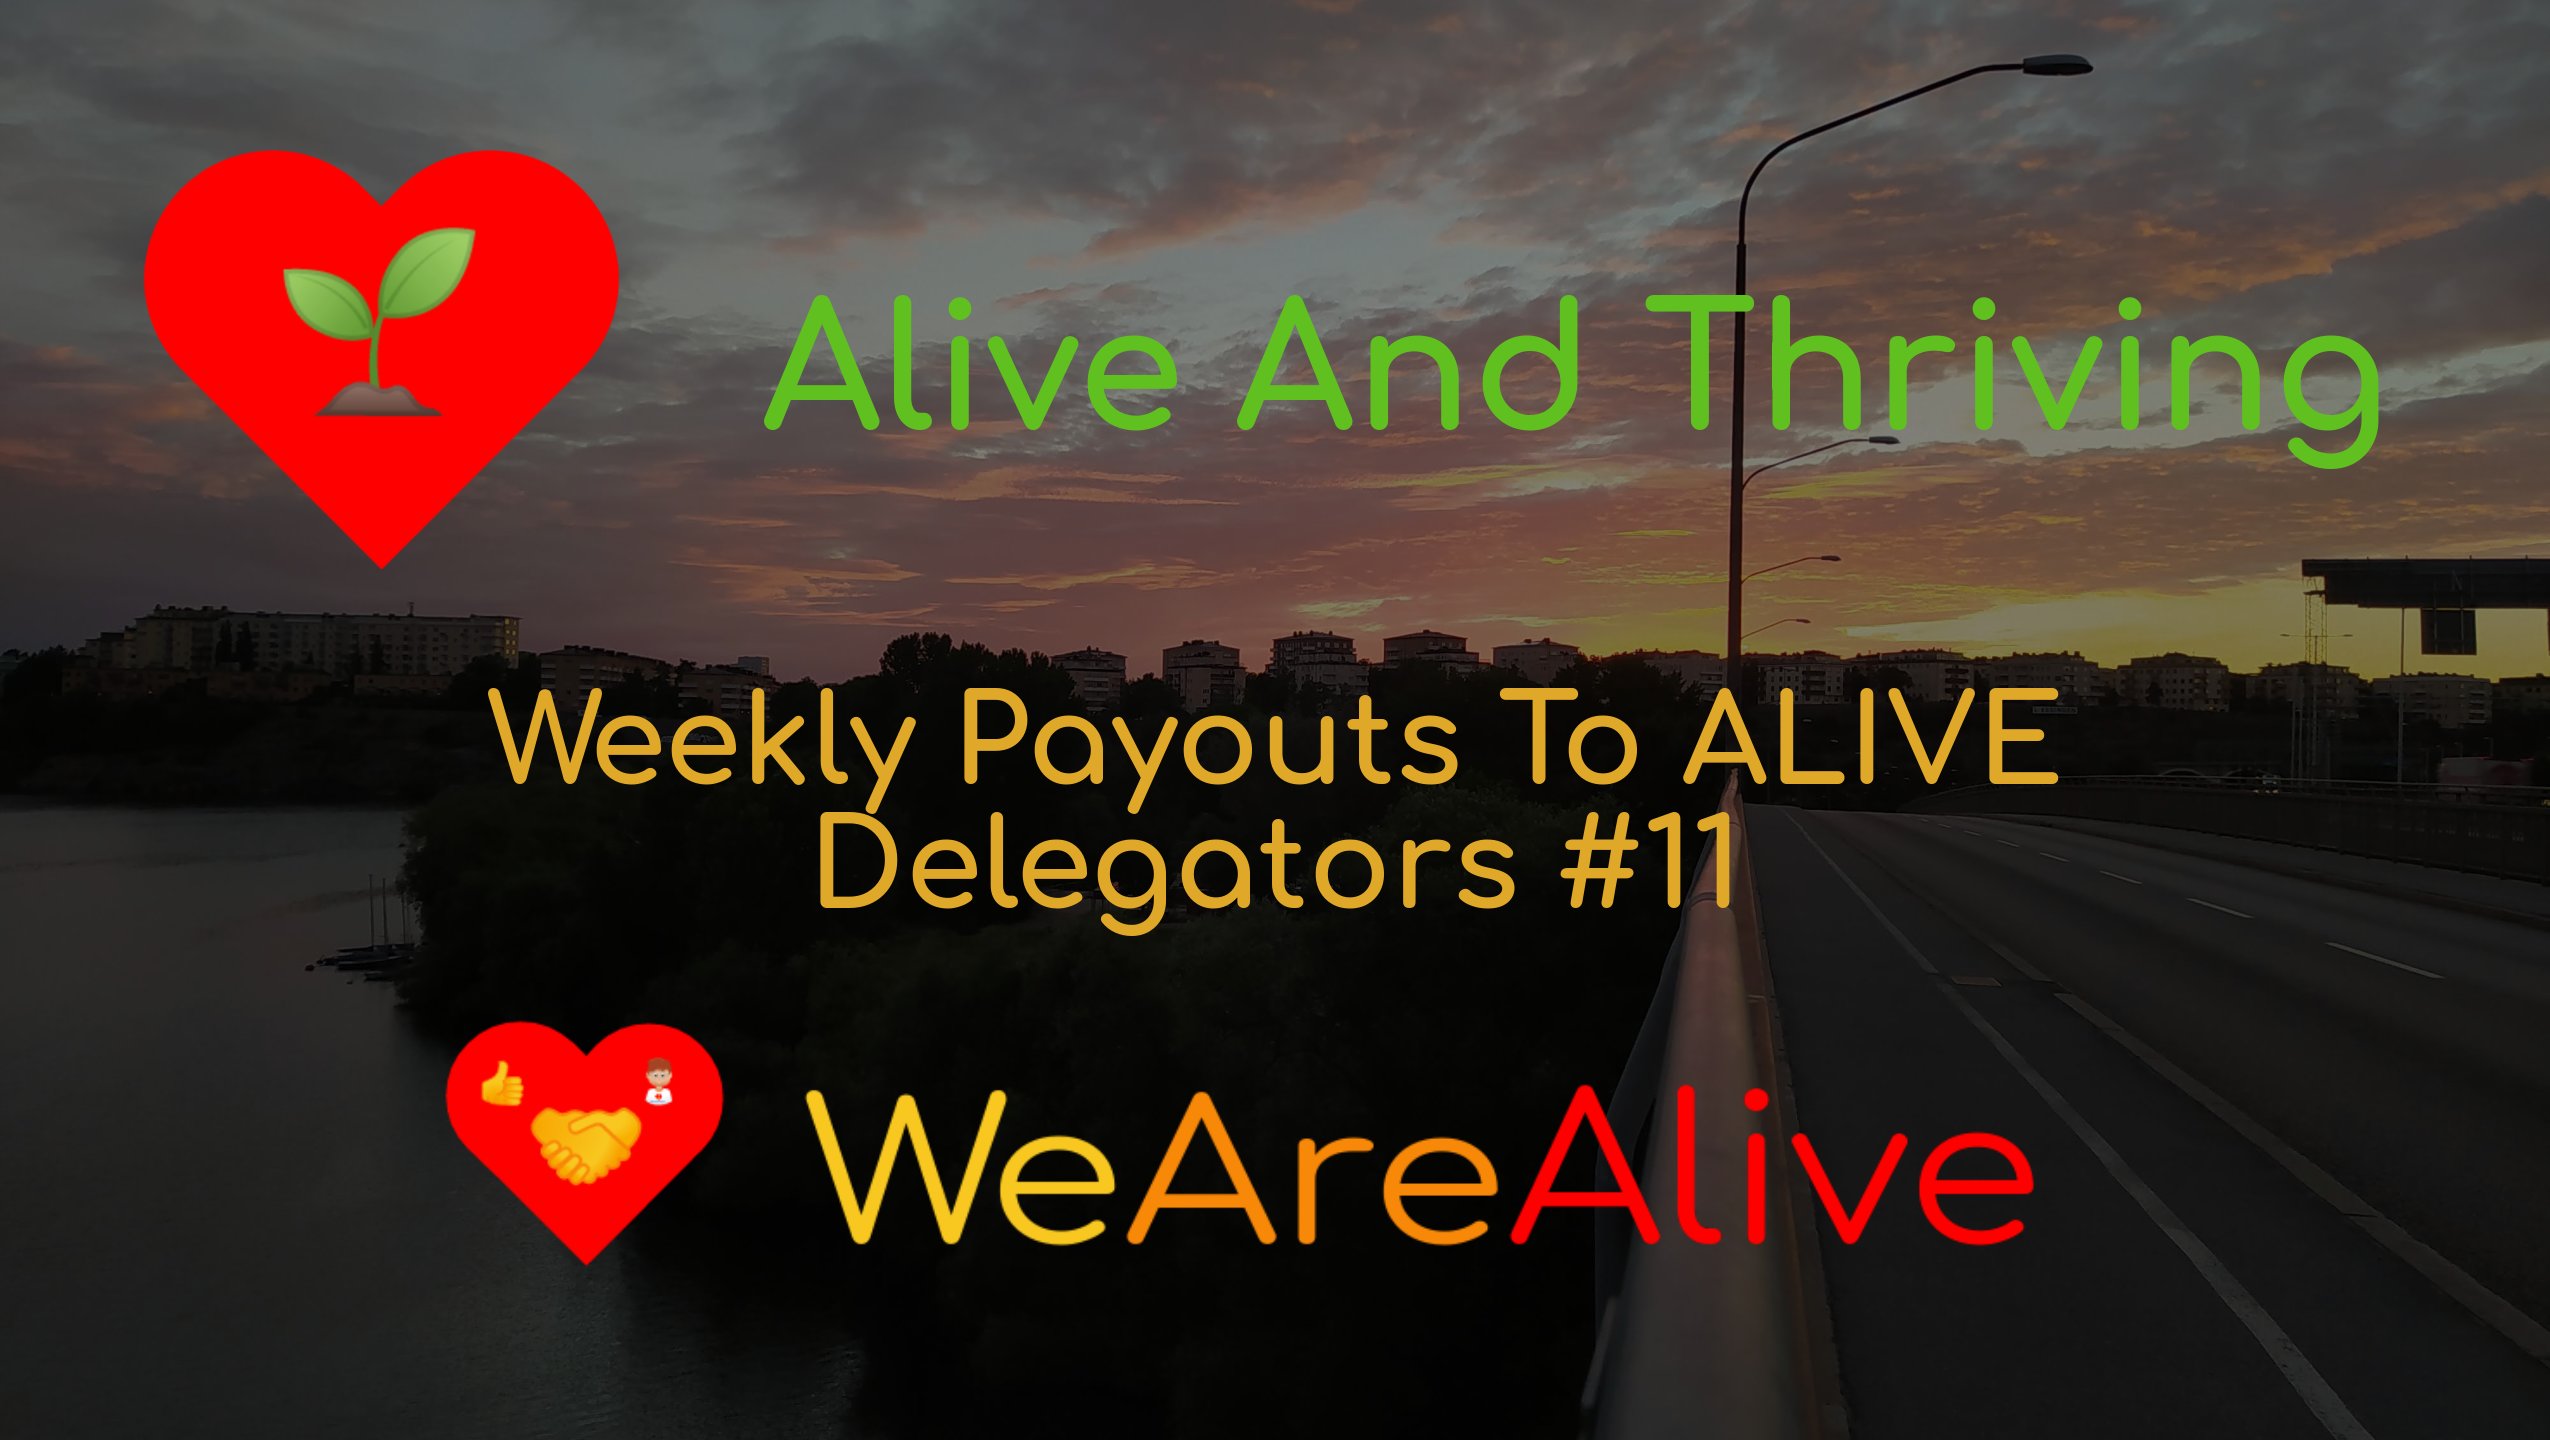 @wearealive/alive-and-thriving-weekly-payouts-to-alive-delegators-11